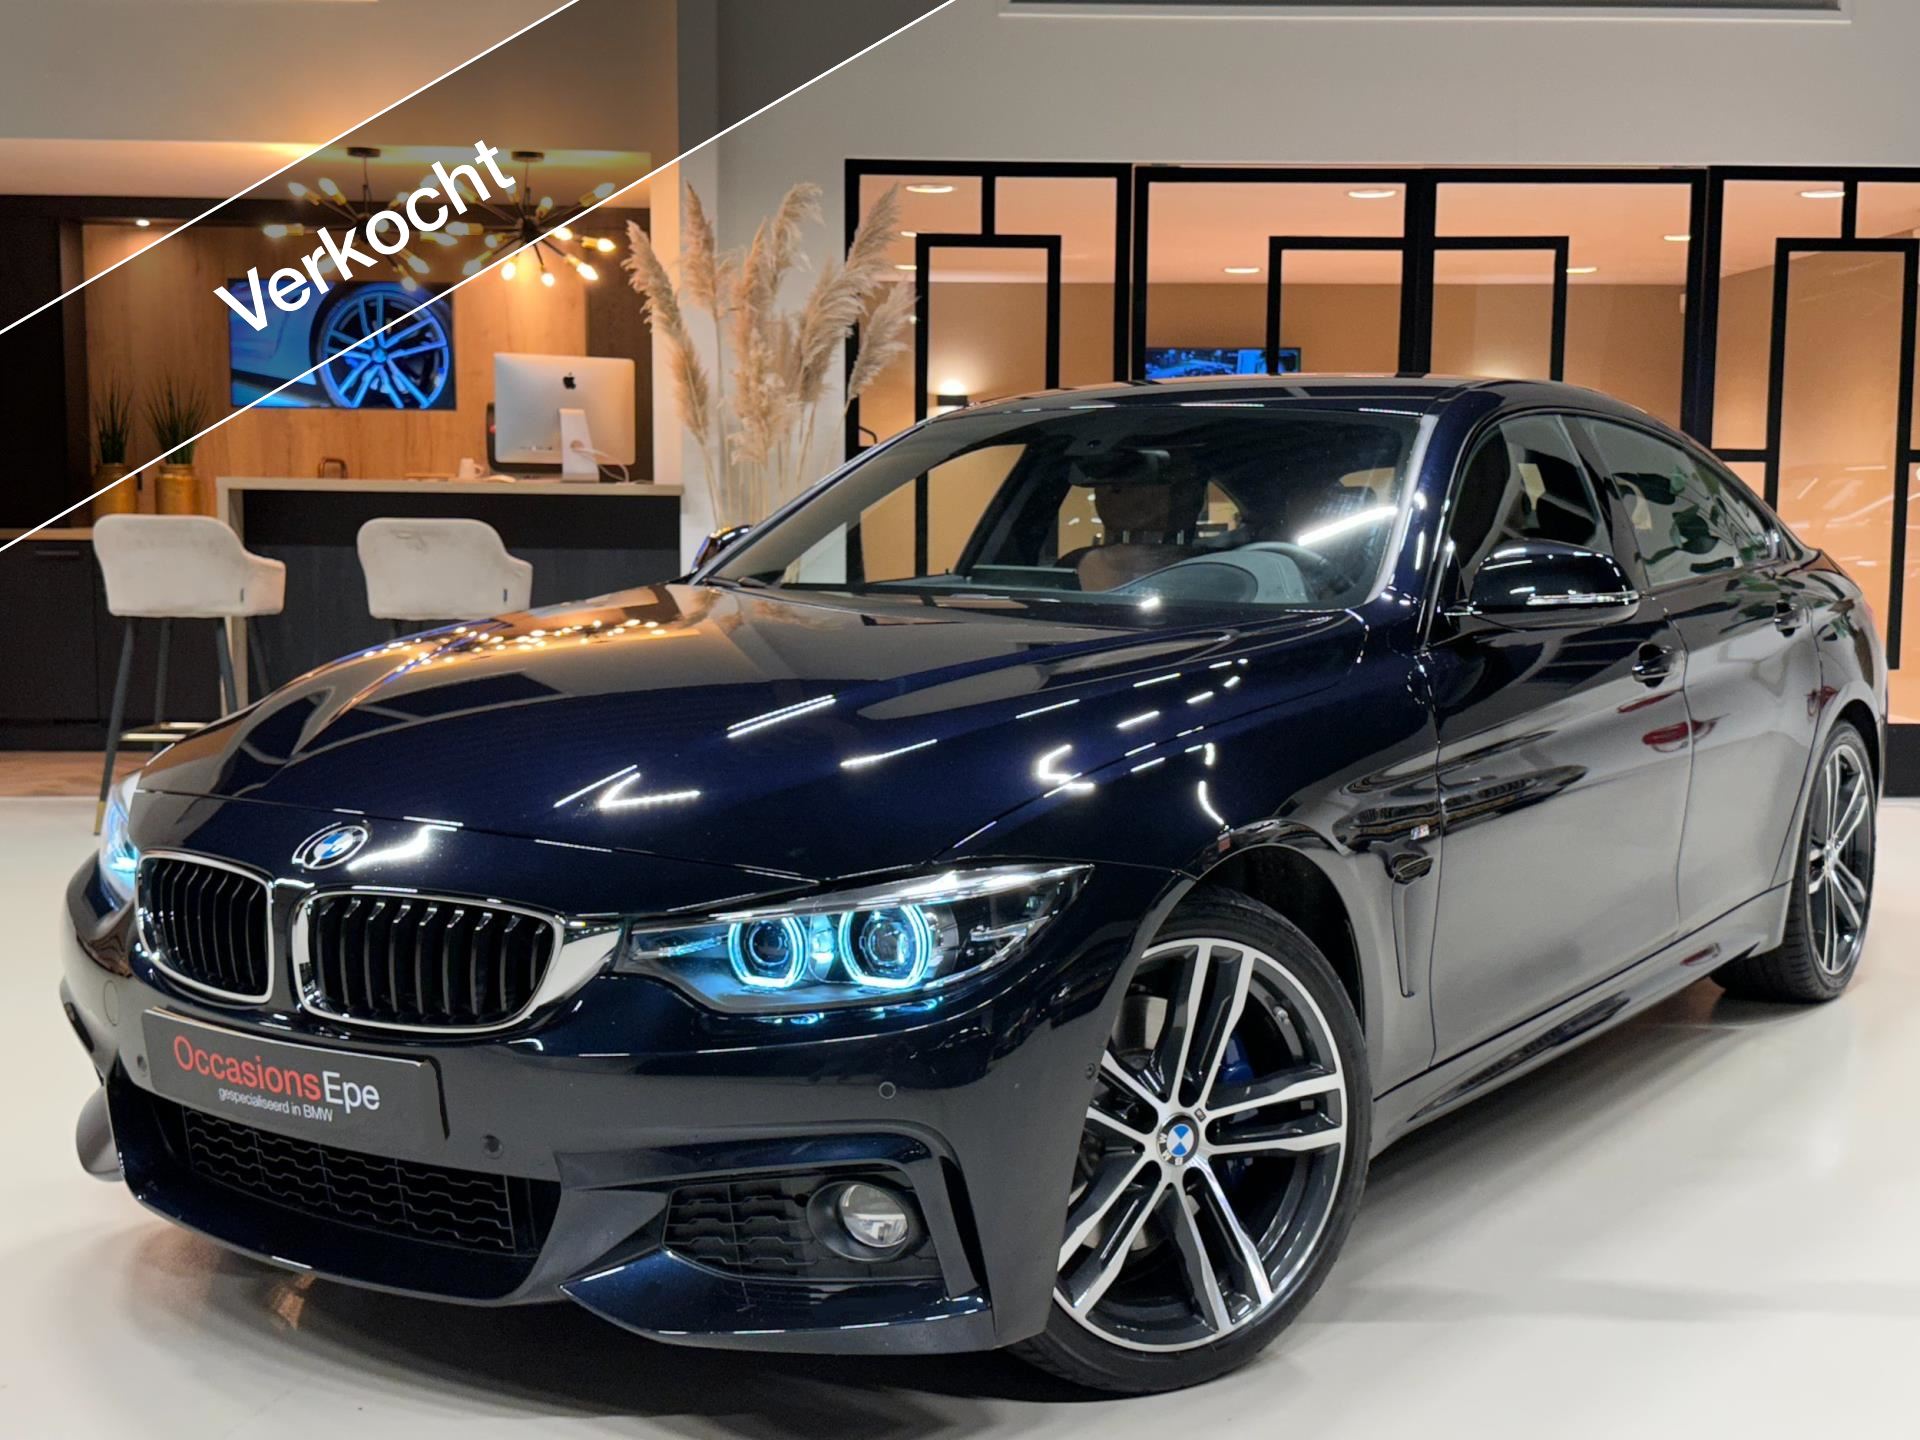 BMW 4-Serie Gran Coupé occasion - Occasions Epe